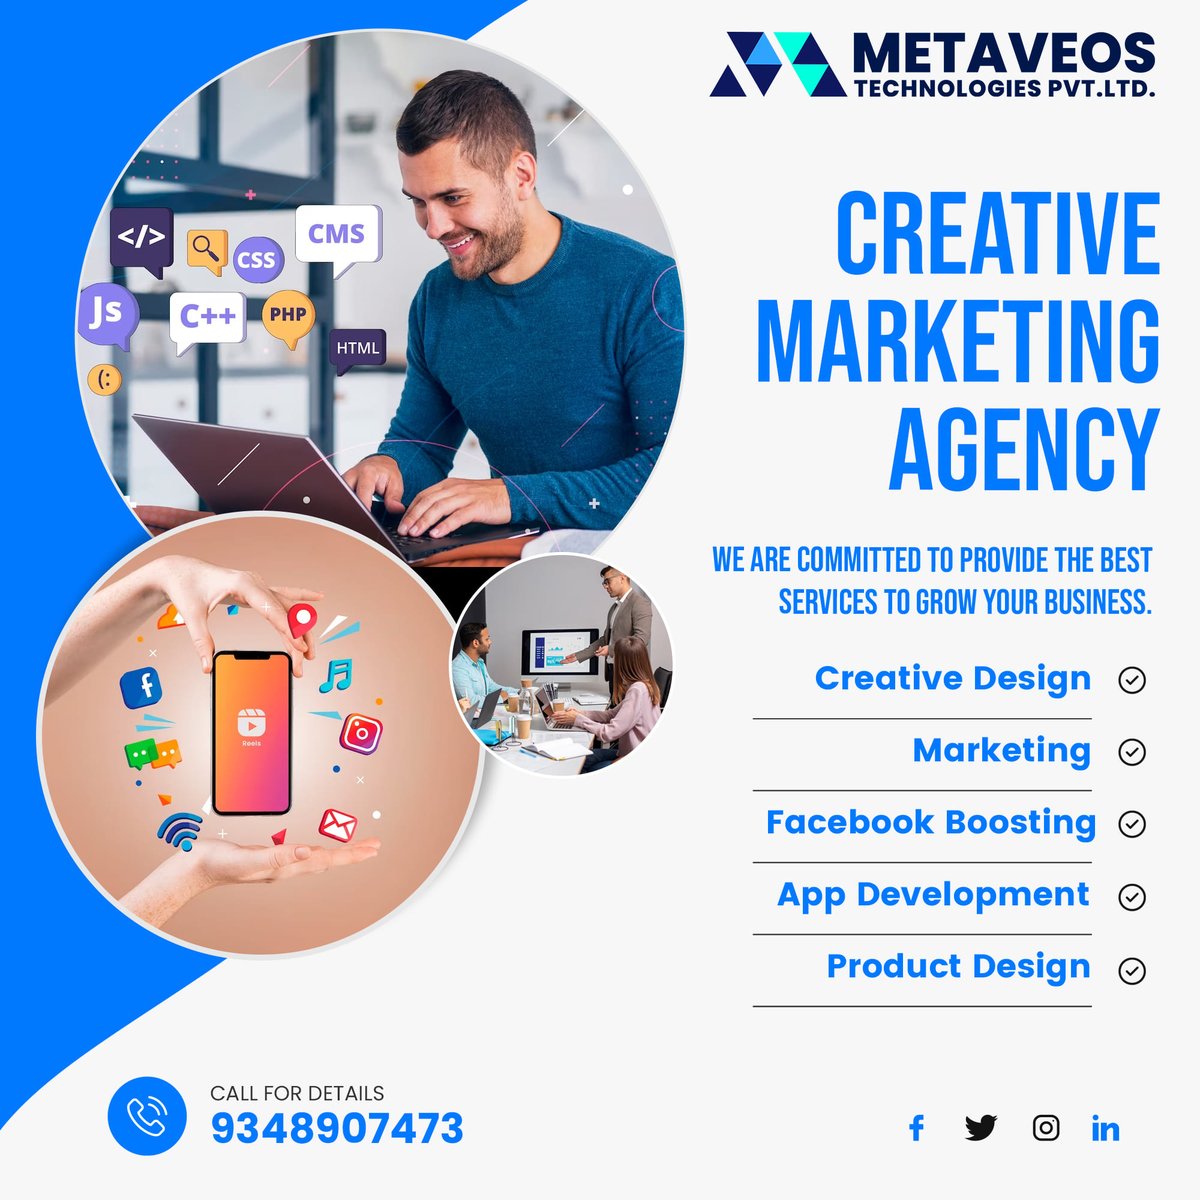 From Strategy to Achievement - Your Marketing Growth Partner @metaveos
Contact with us: +91 9348907473/0674-7966327.
For more details visit: metaveostechnologies.com
Email us at: info@metaveostechnologies.com
#softwaredevelopment
#SEOStrategies
#DigitalSuccess
#metaveos